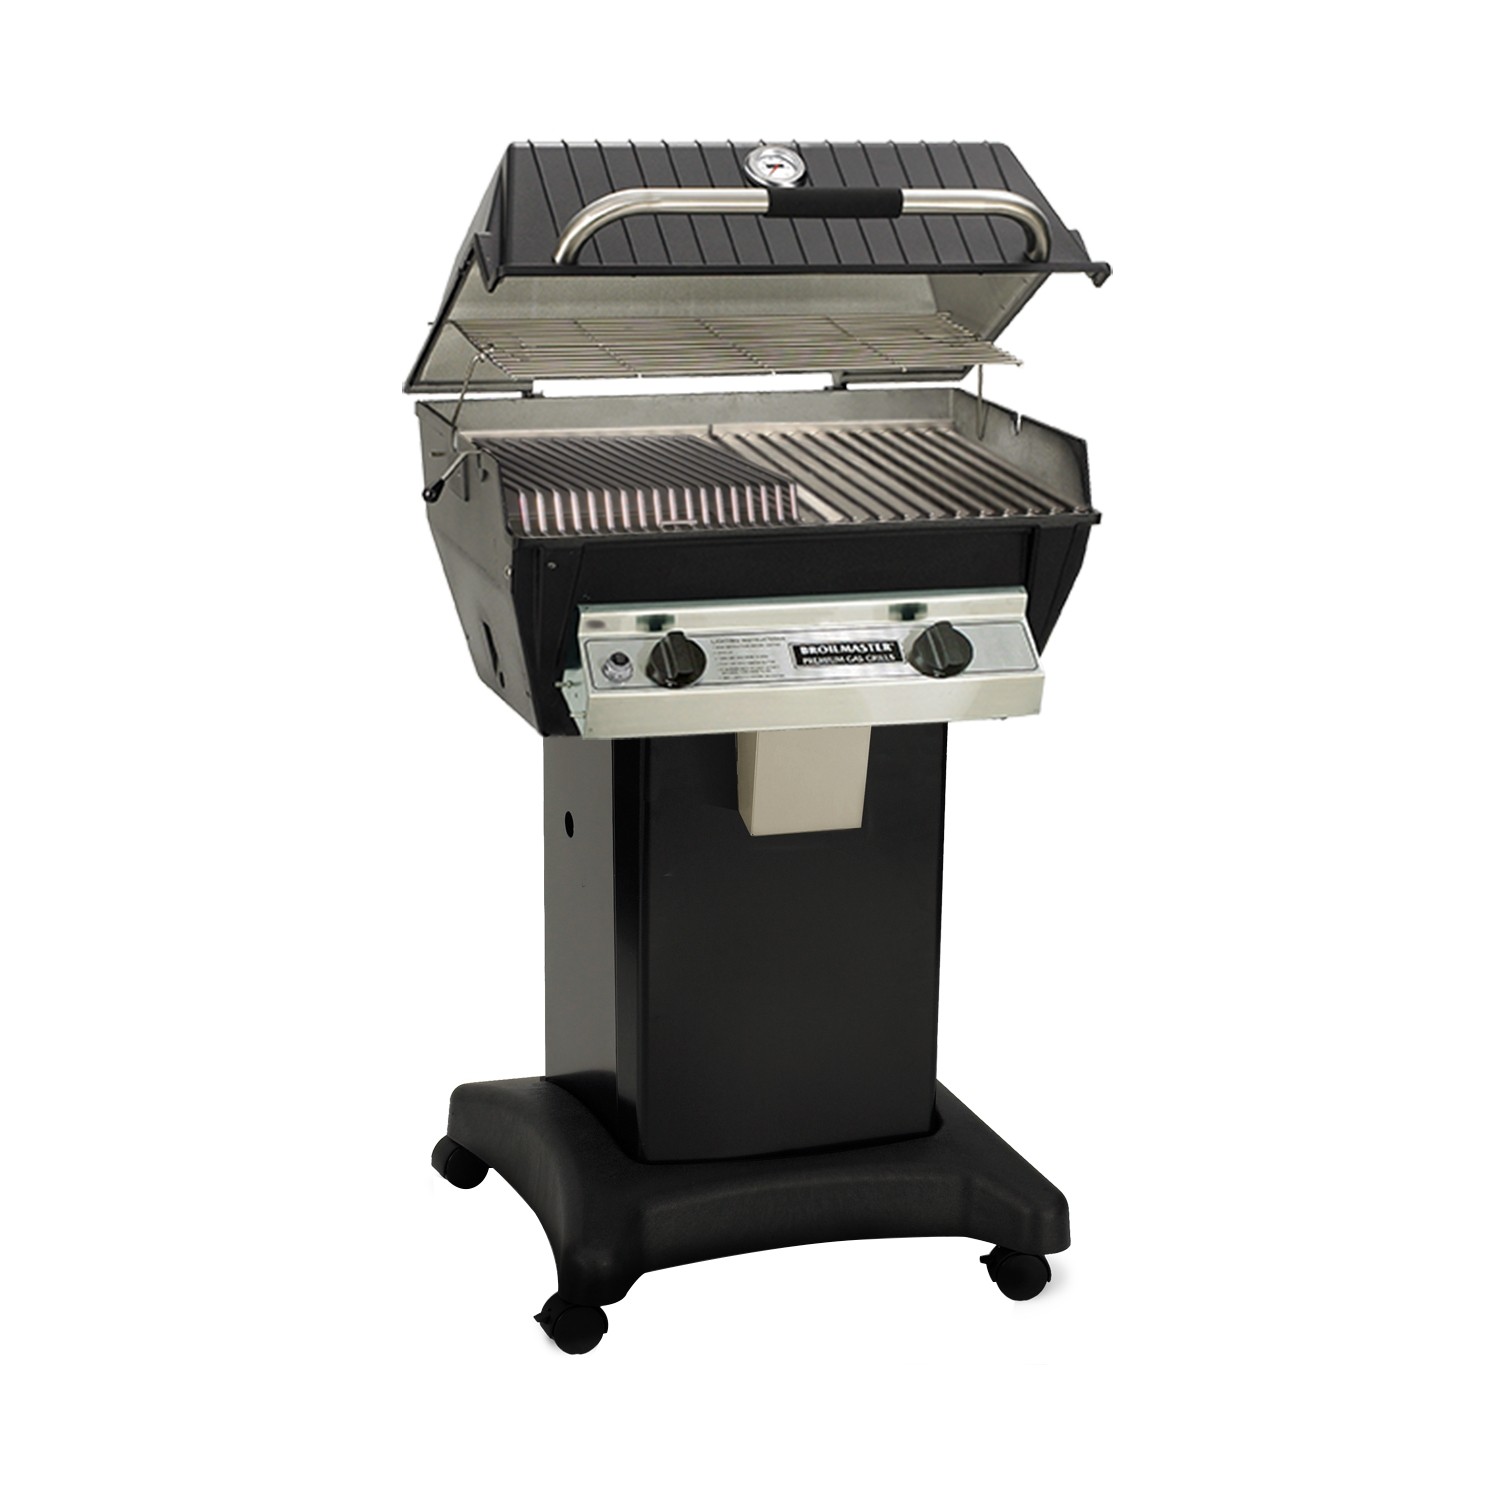 BROILMASTER R3BN INFRARED SERIES NATURAL GAS GRILL WITH LEFT BLUE FLAME AND RIGHT IR BURNER - BLACK